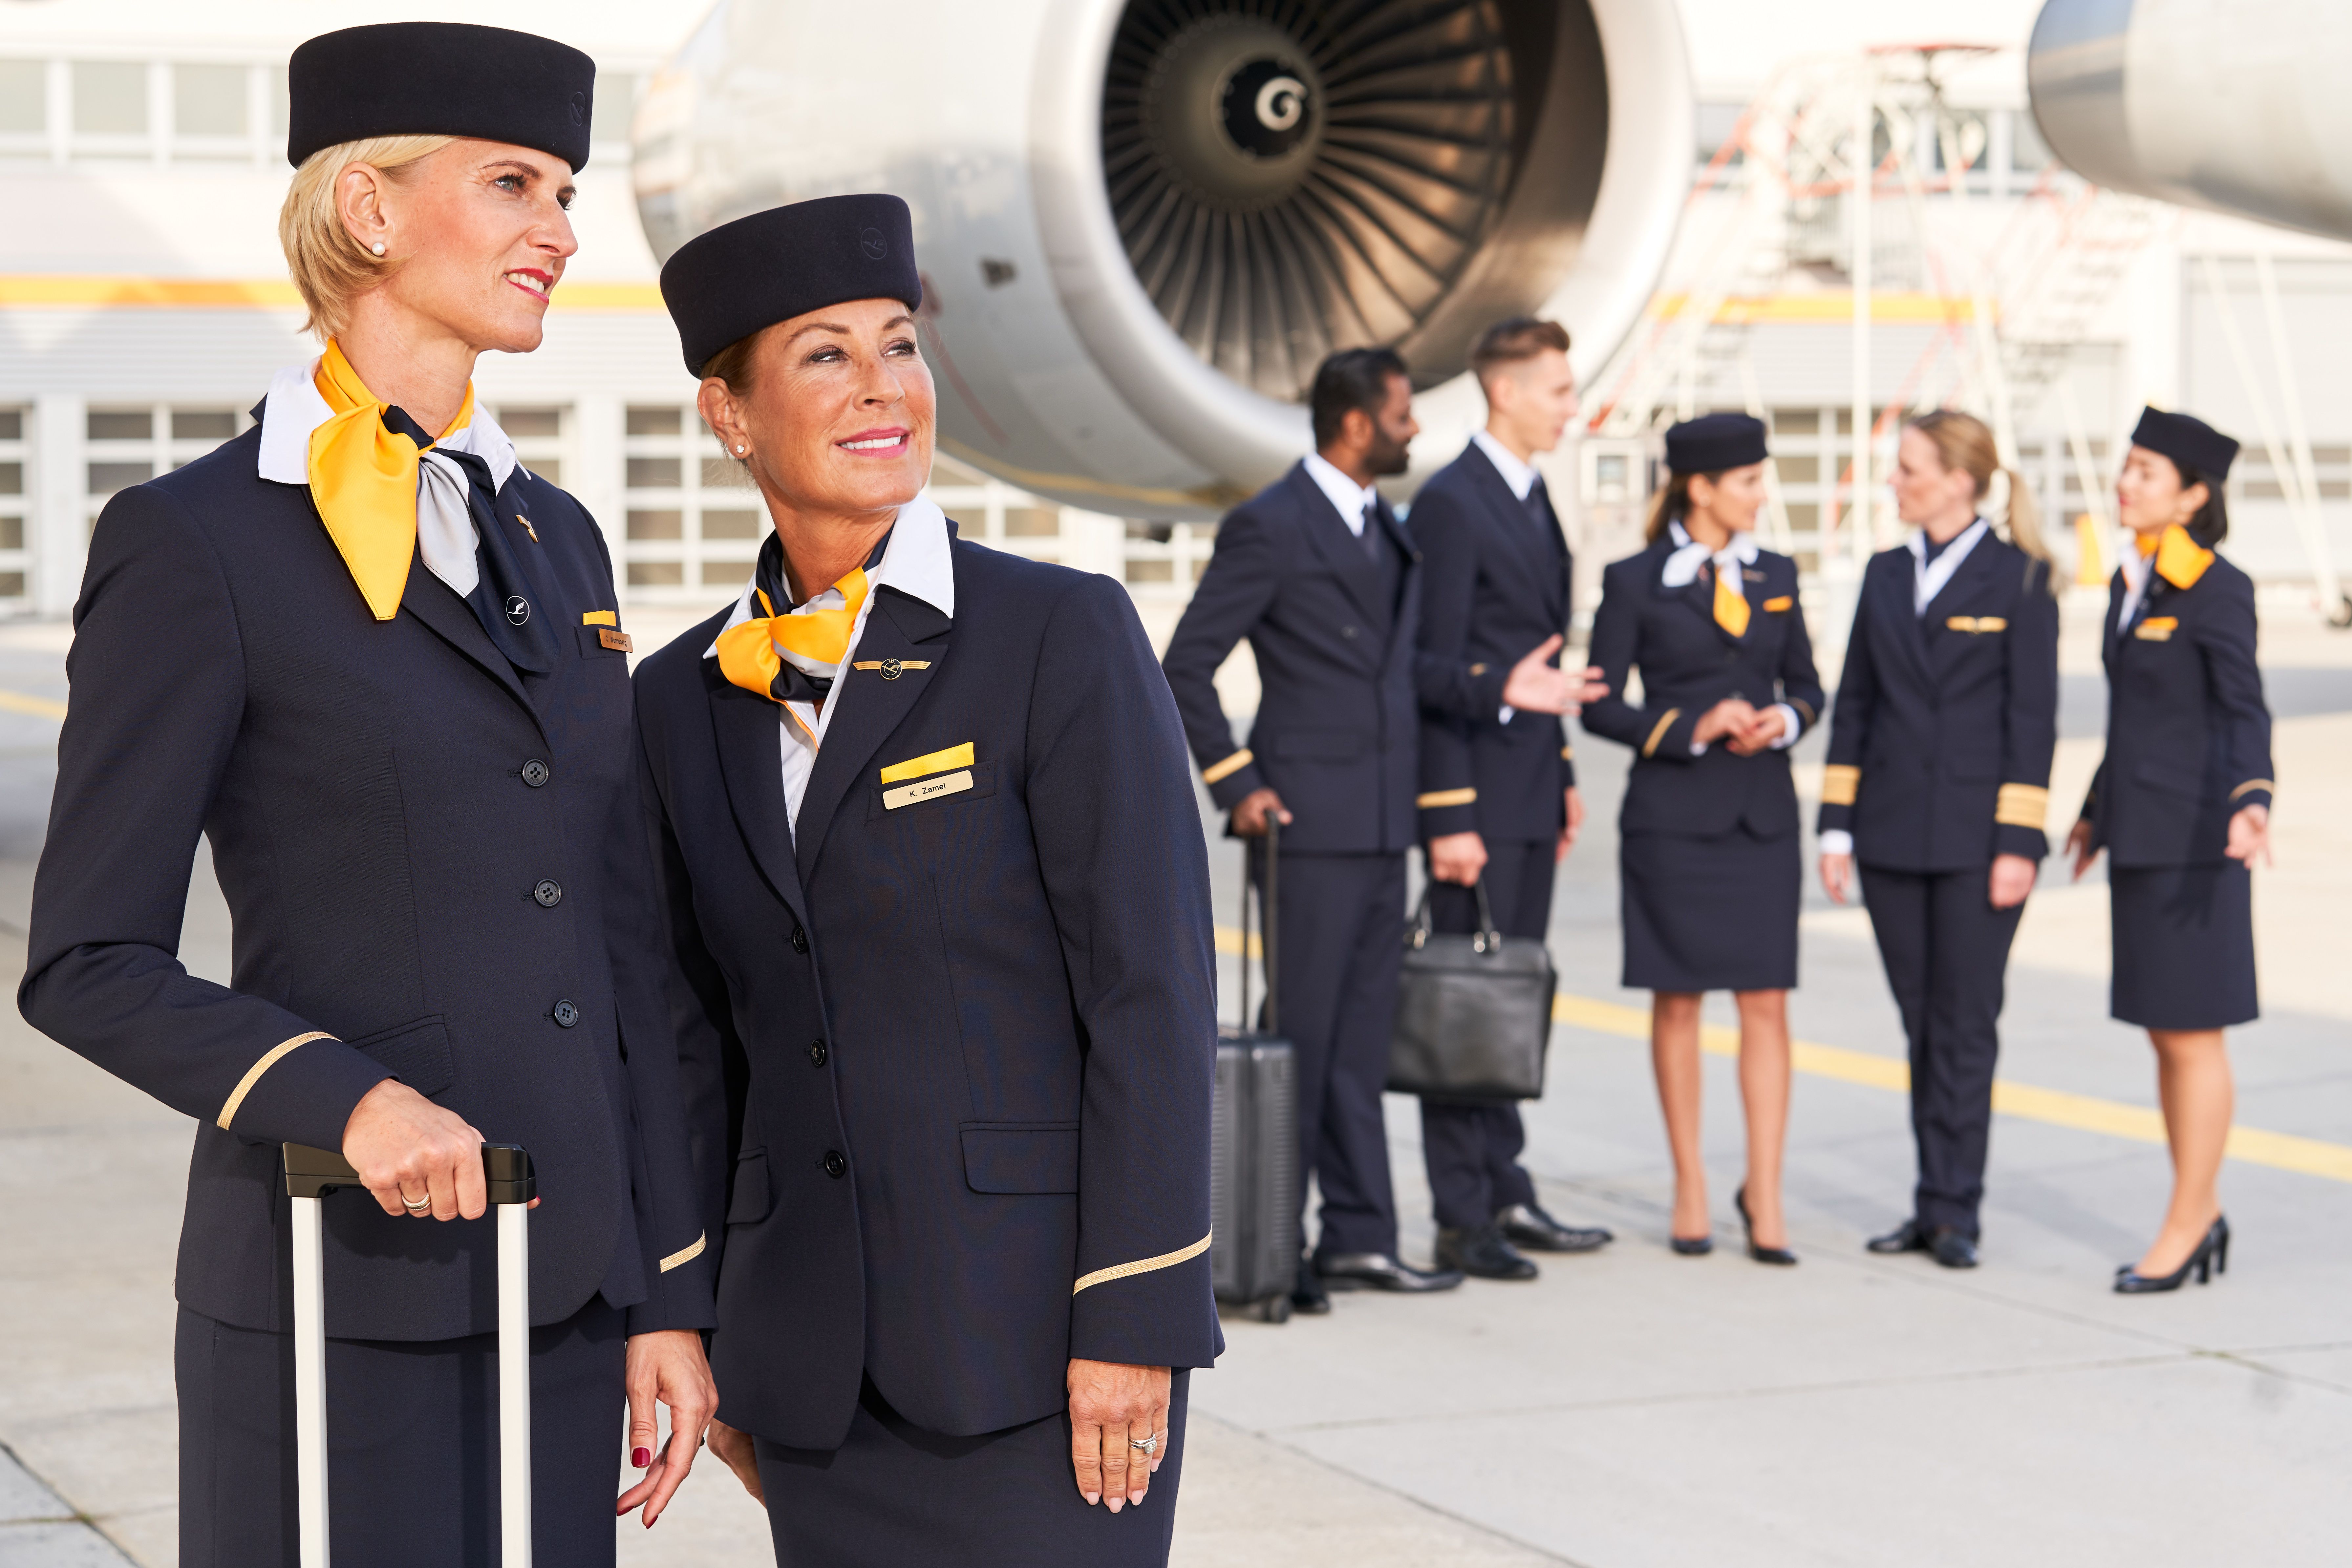 Lufthansa cabin crew standing in front of jet